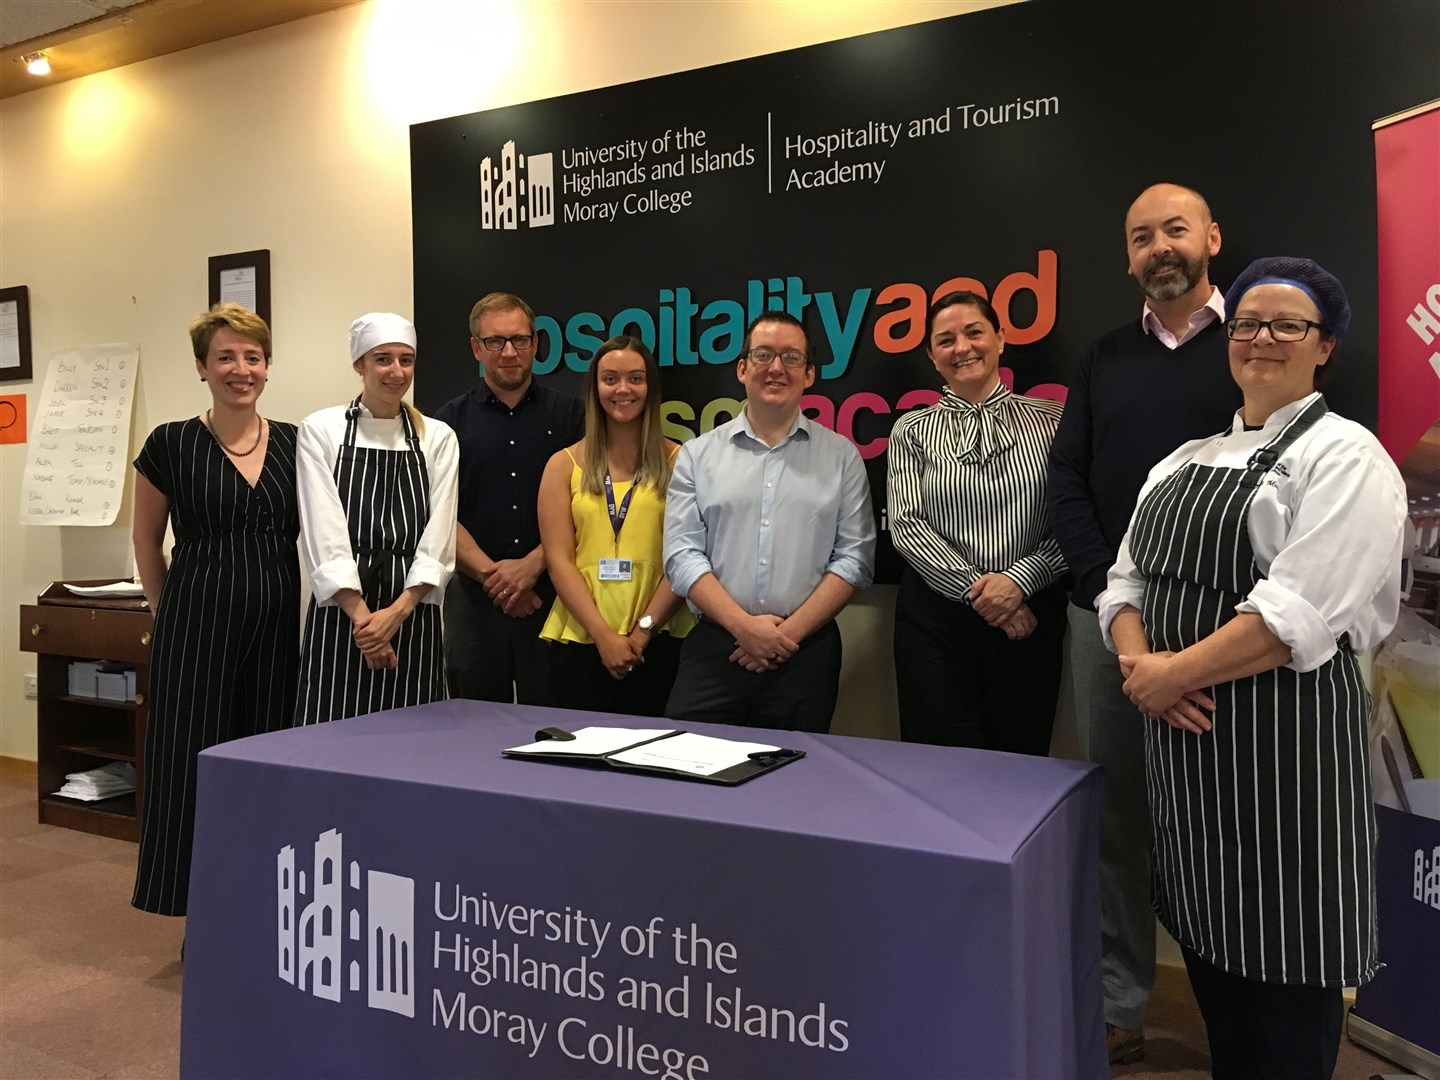 From left: Steph Murray from The Dowans Hotel, hospitality student Caitlyn Angus, deputy head of curriculum Alistair Fowlie, Aimee Stephen from DYW Moray, Lee Jack from the Sun Dancer restaurant, Claire Owens from The Macallan, Kevin Smith of The Craigellachie Hotel, and student Lotta Nilsson.